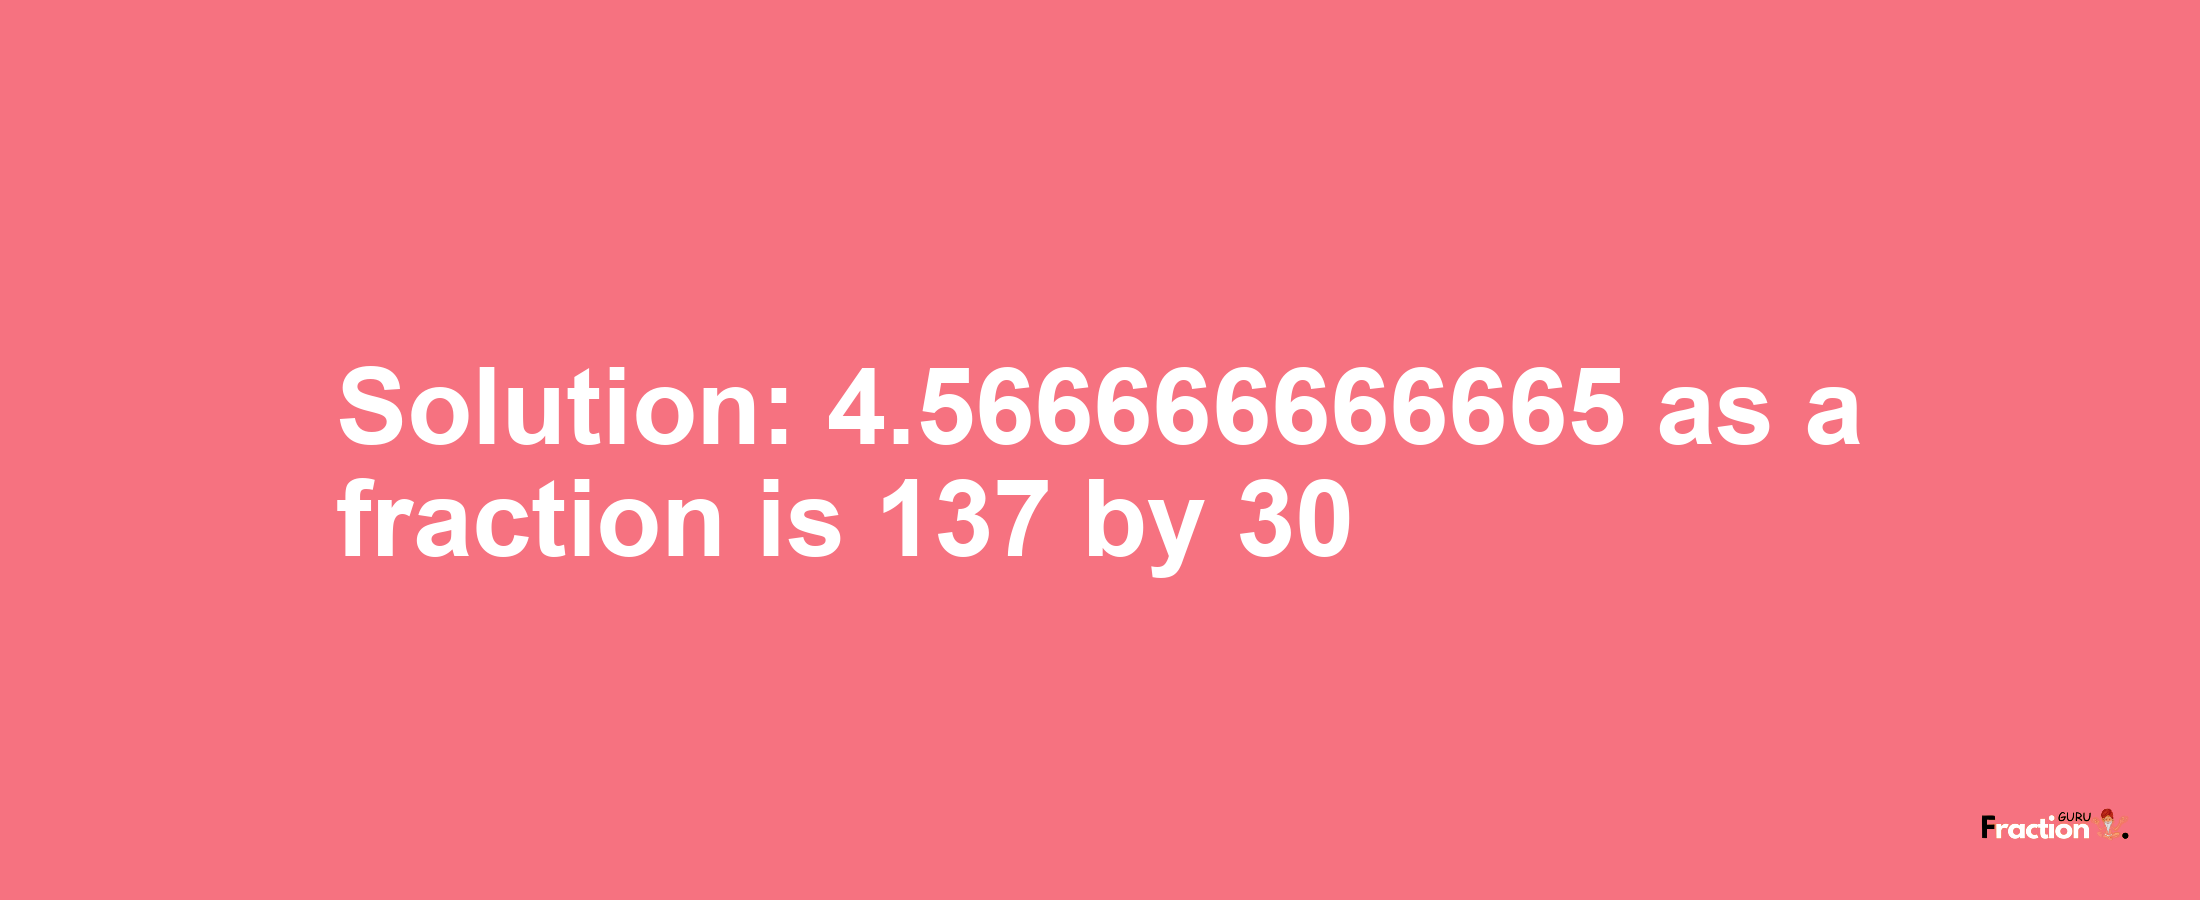 Solution:4.566666666665 as a fraction is 137/30